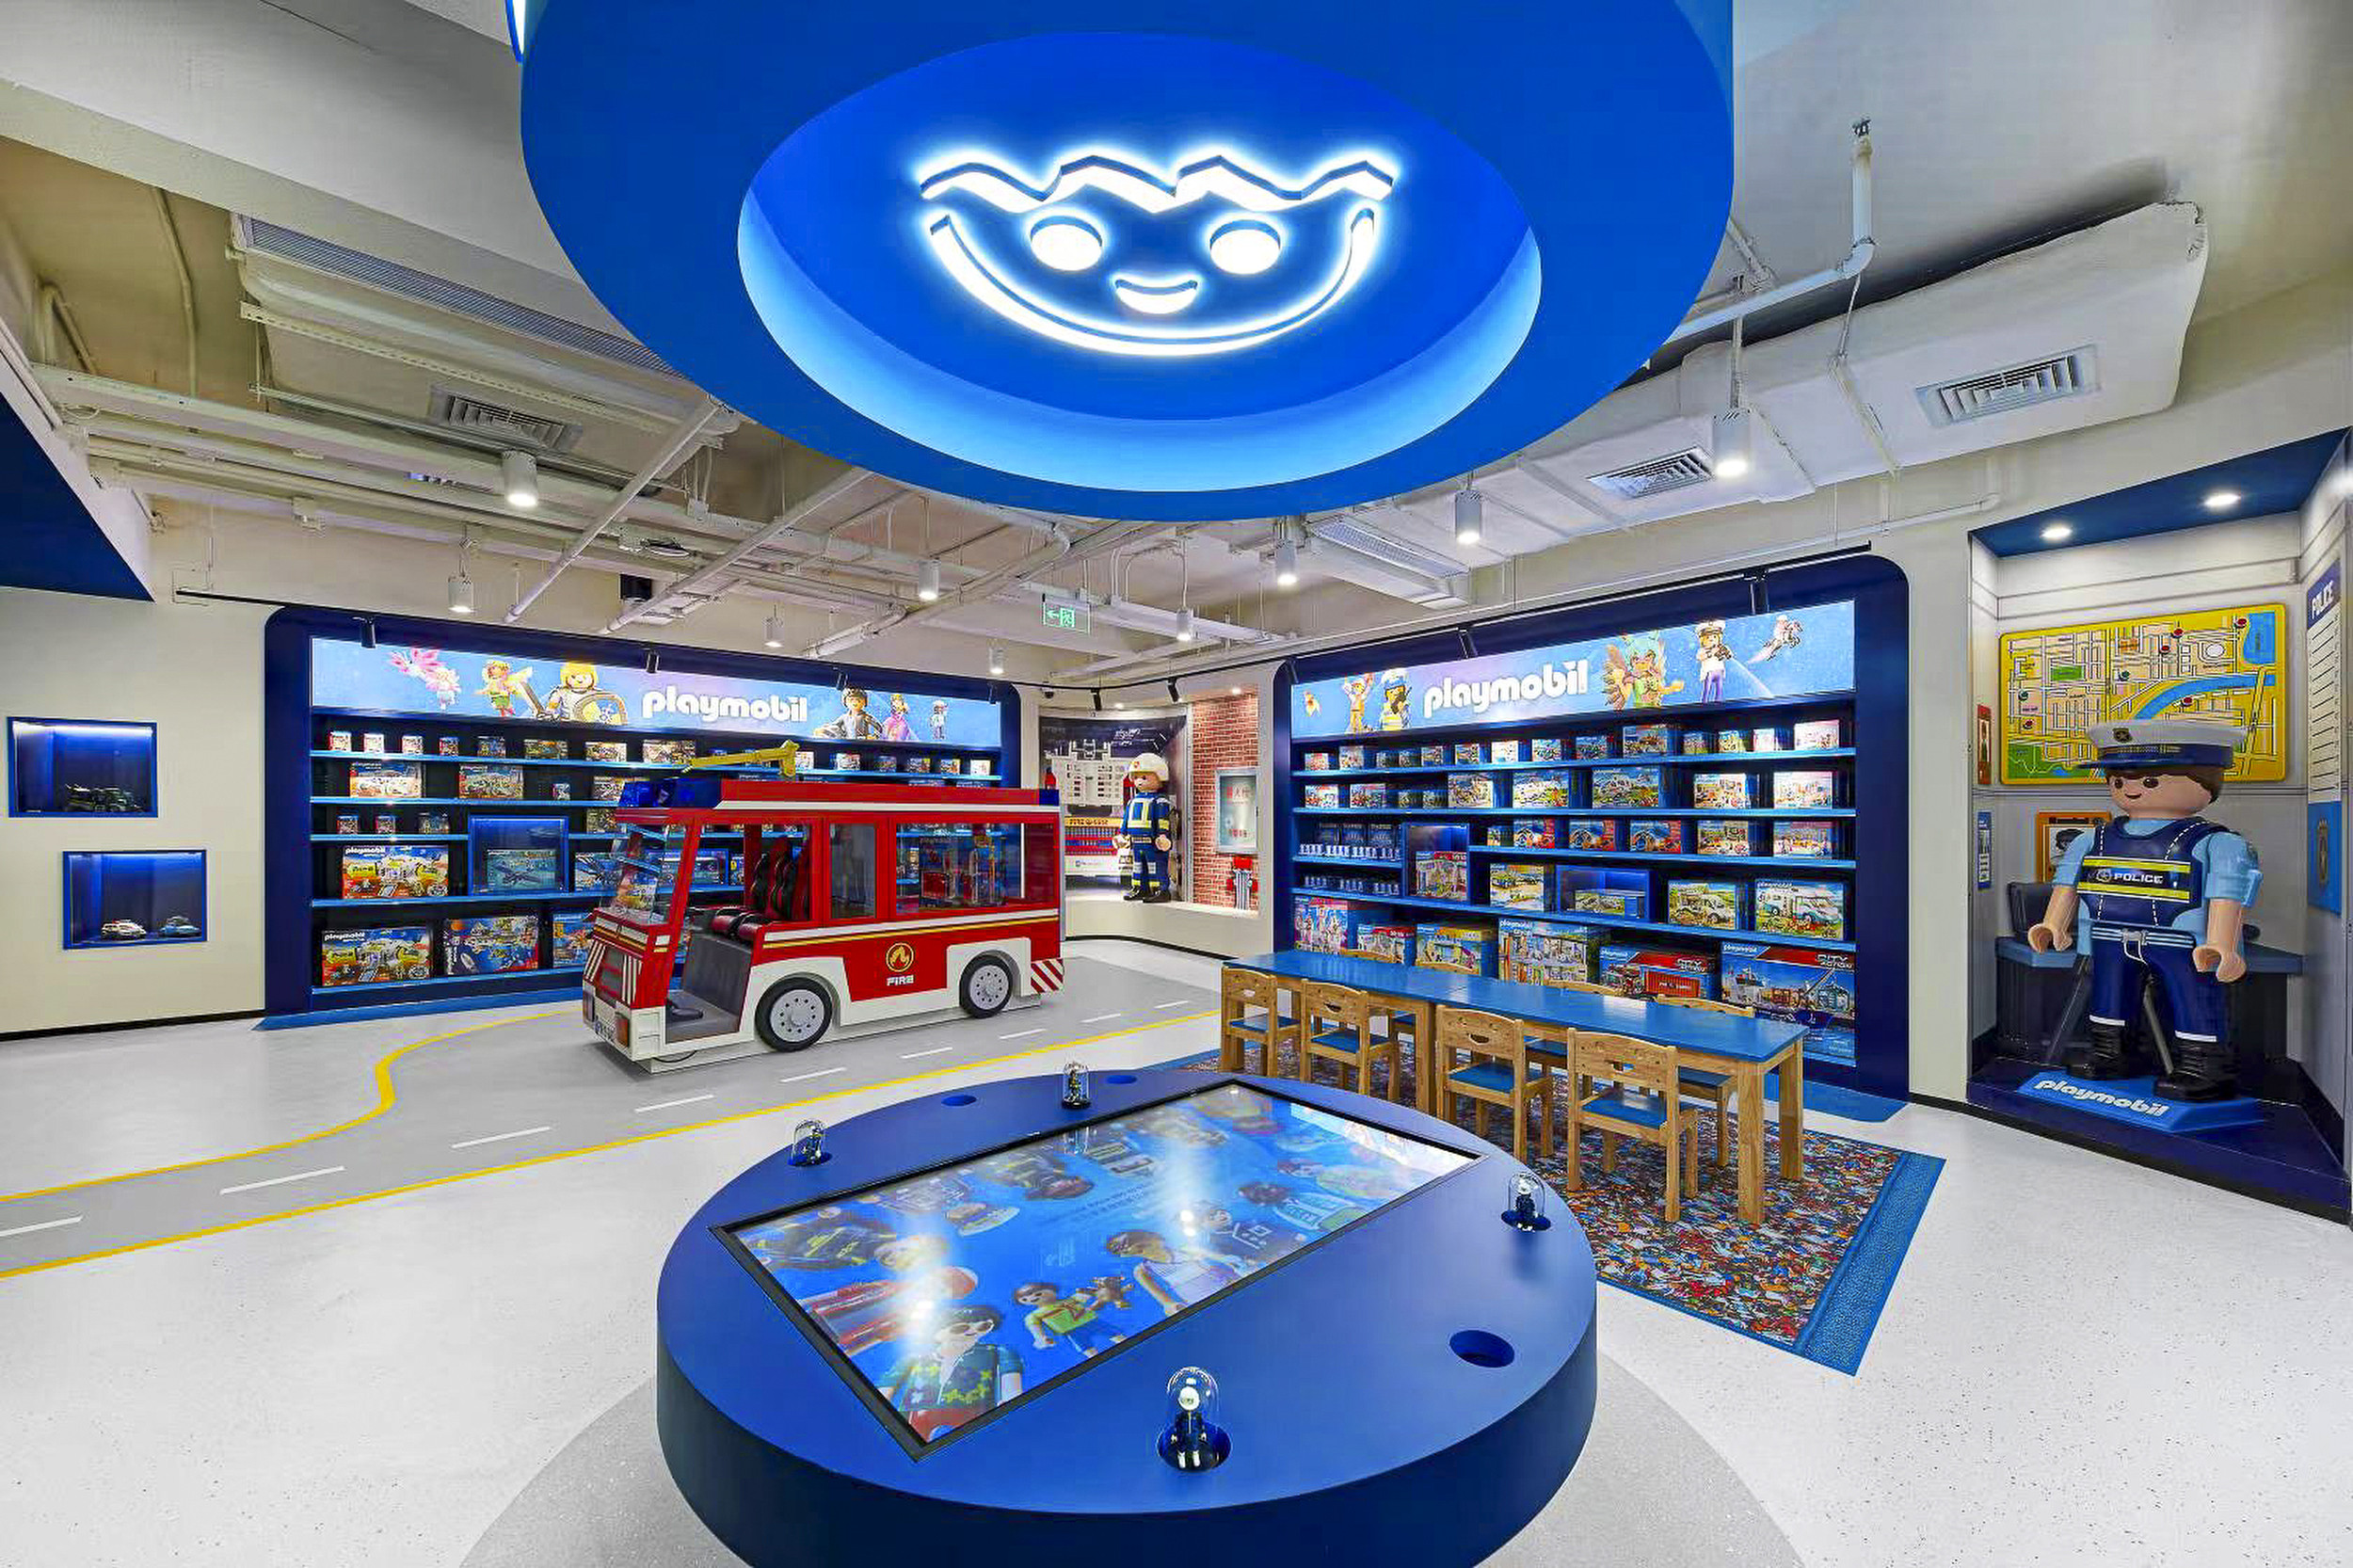 The opening of Playmobil’s experience store in Shanghai was delayed for four months due to the city’s lockdown. Photo: Handout